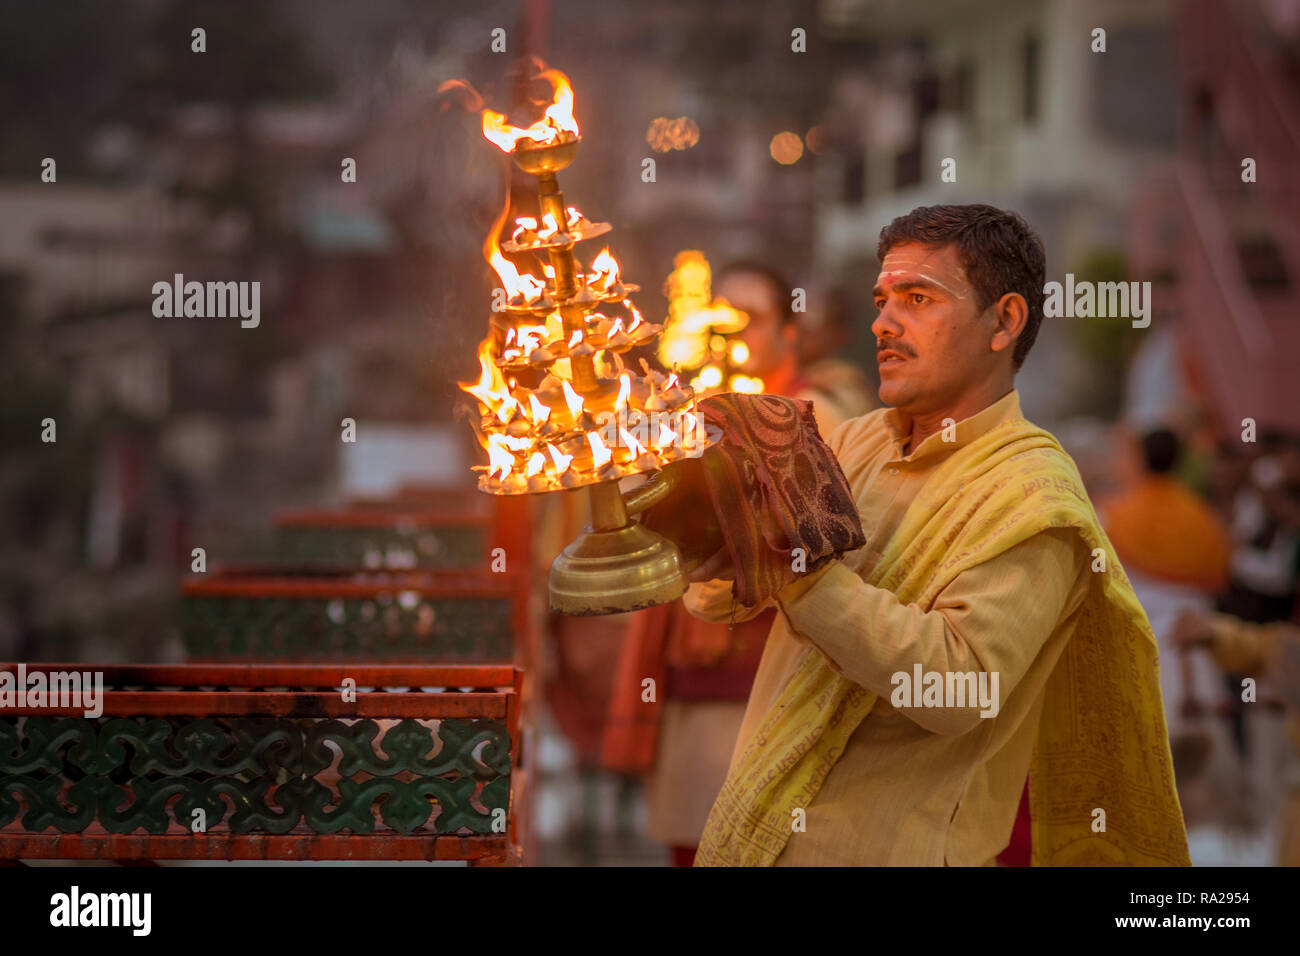 Traditional Fire ceremony in Rishikesh India, Indian man performing Pugea rituals. Stock Photo